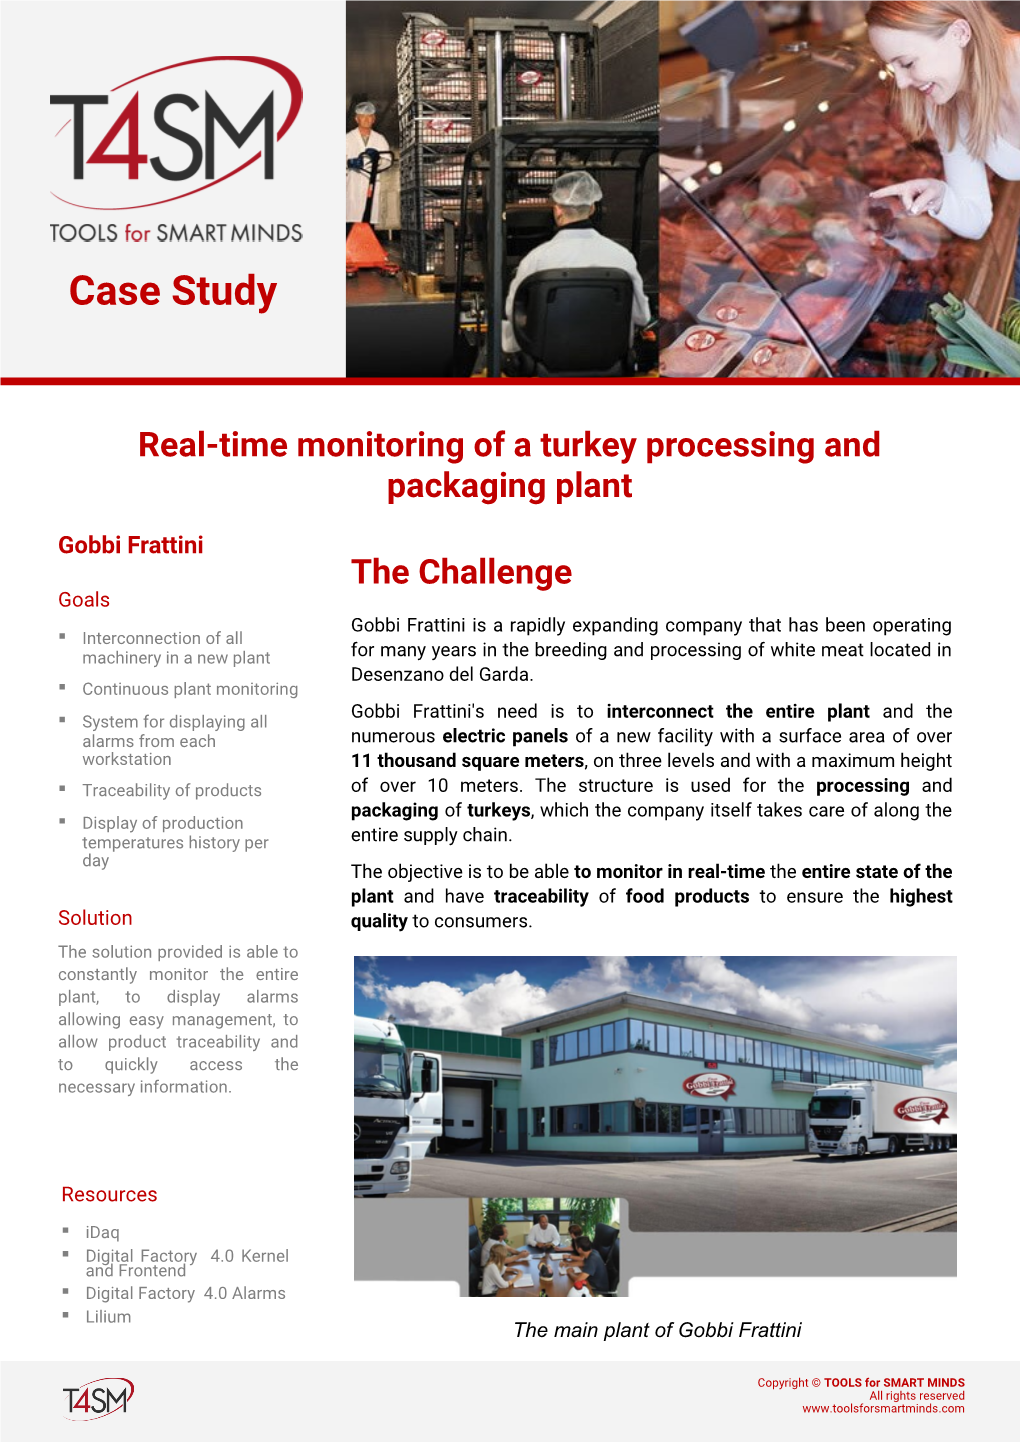 Real-Time Monitoring of a Turkey Processing and Packaging Plant